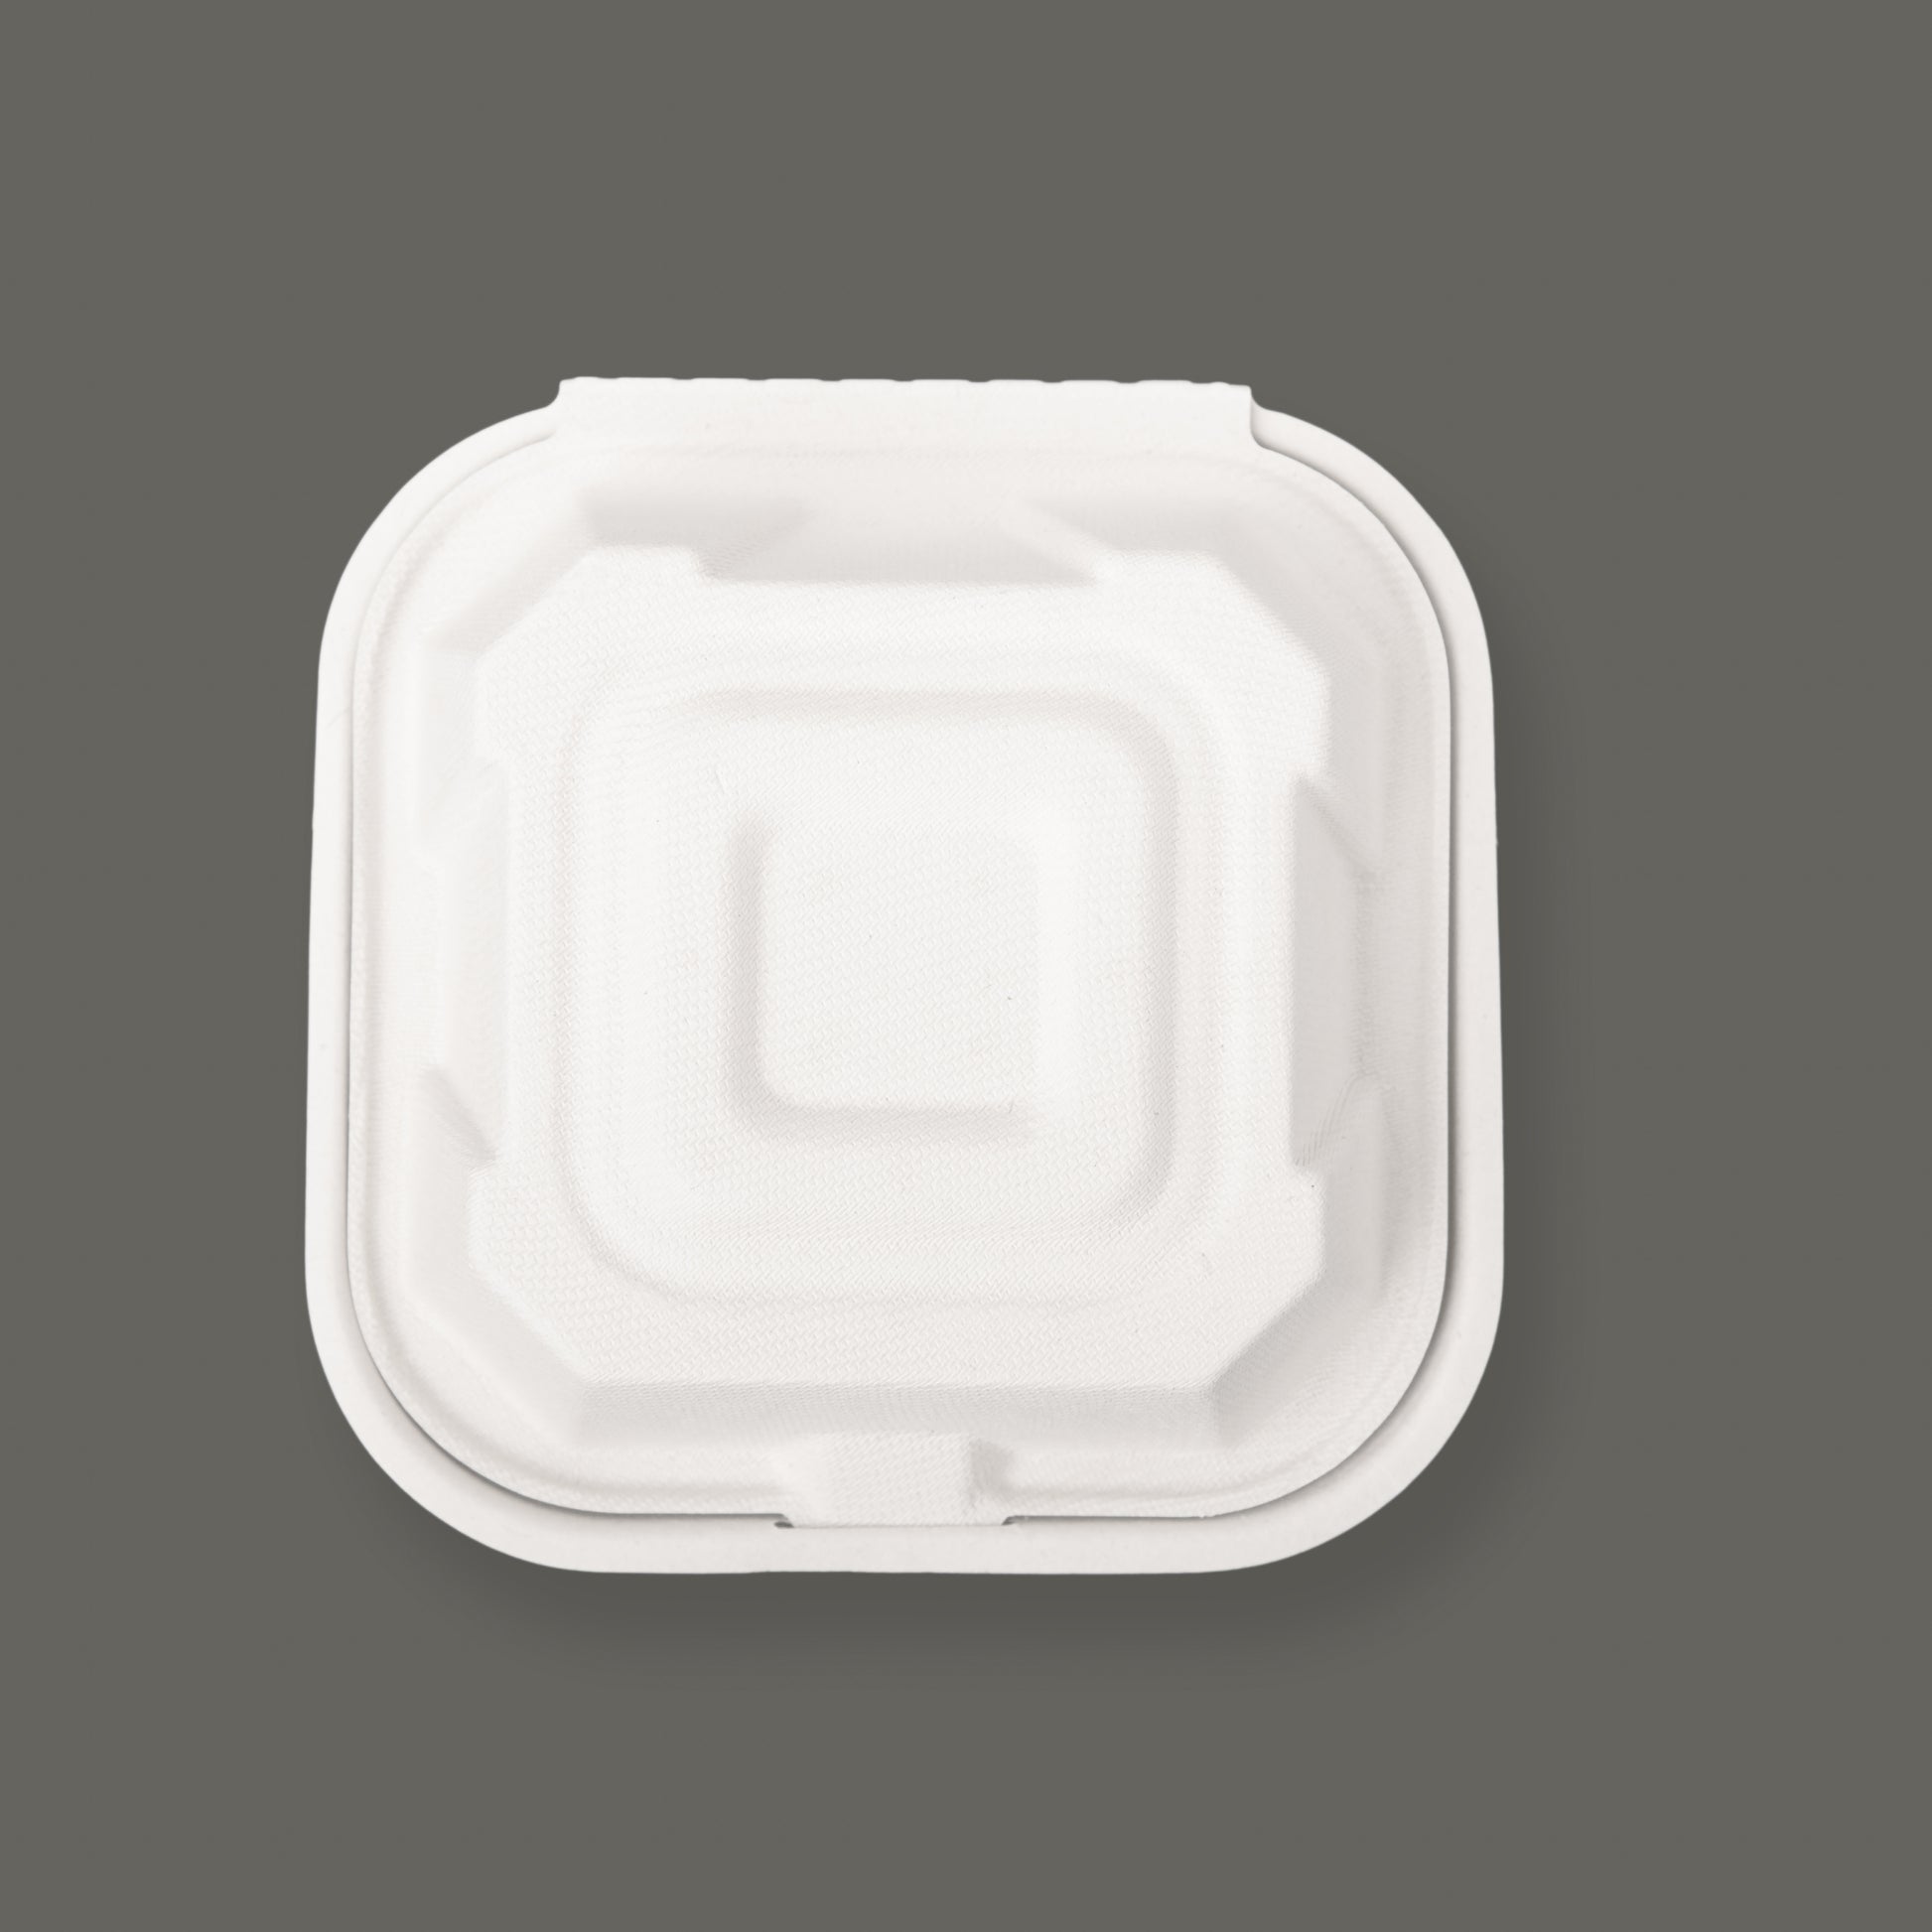 Bagasse Clamshell Container 6"x6"x3" from EcoPaack